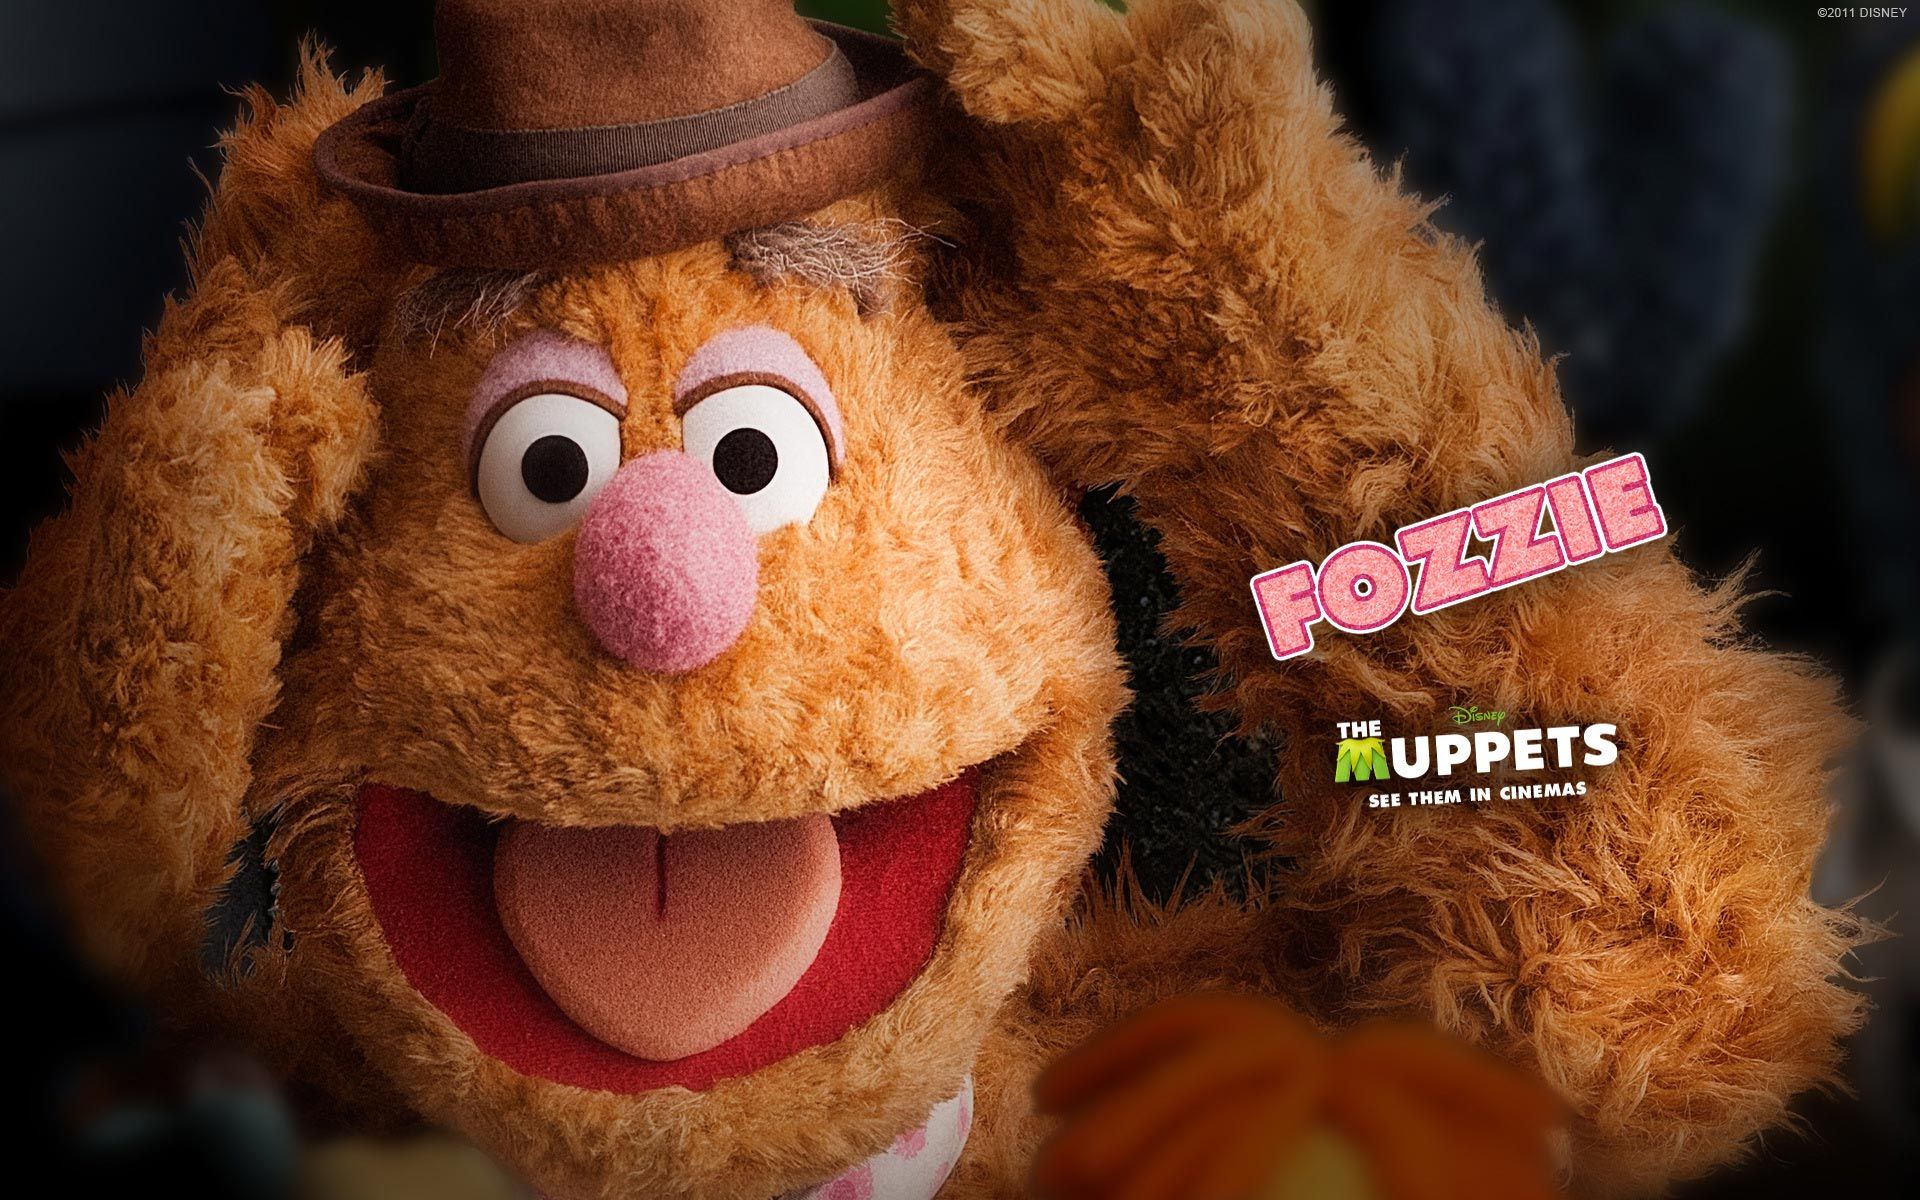 Fozzie, The Muppets Wallpaper. Muppets, The muppets The muppet show